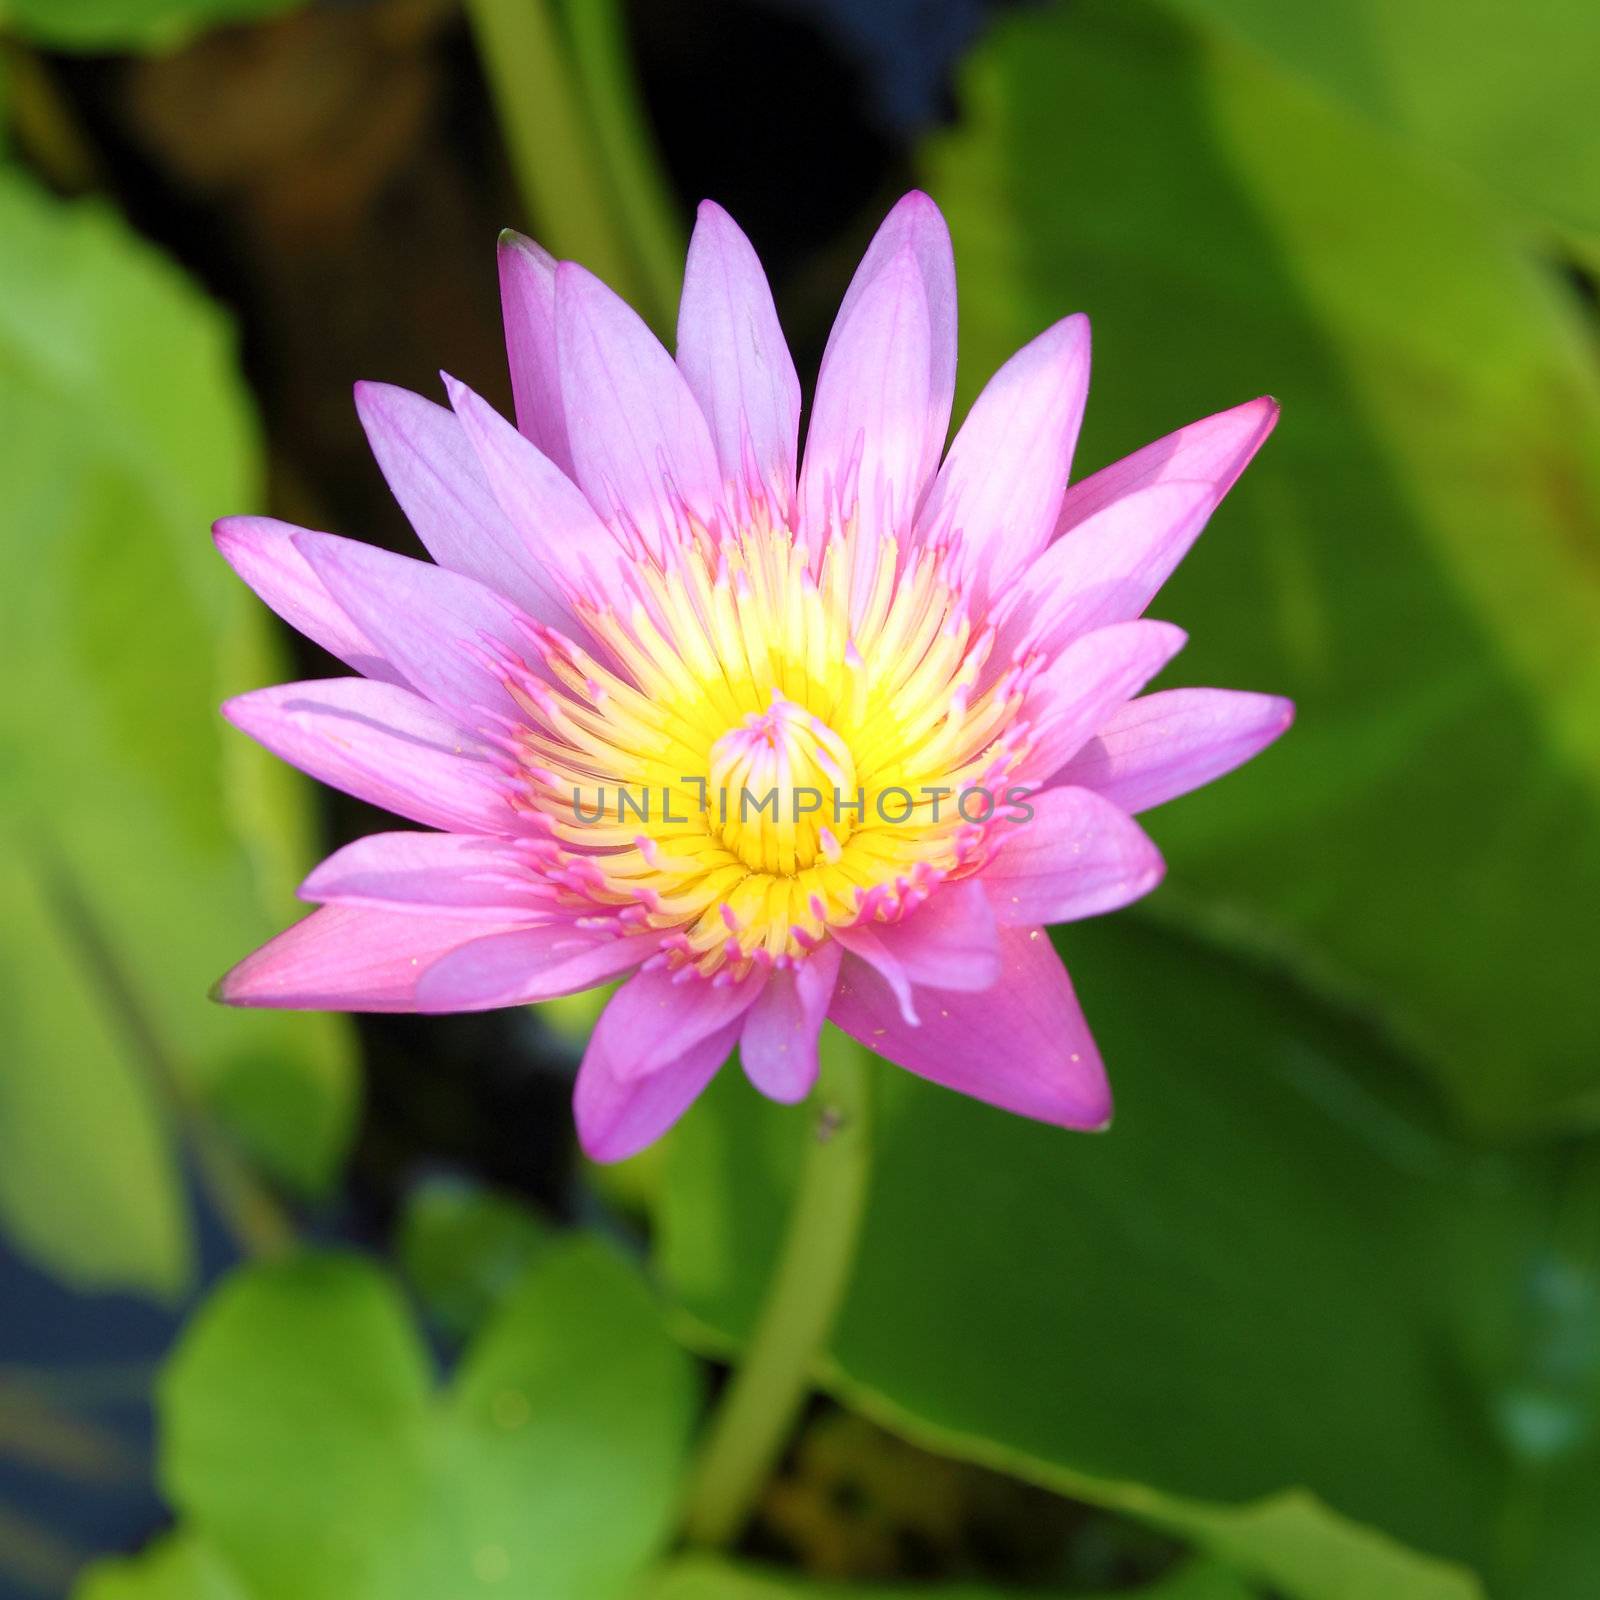 The blooming pink lotus in the natural pond by geargodz